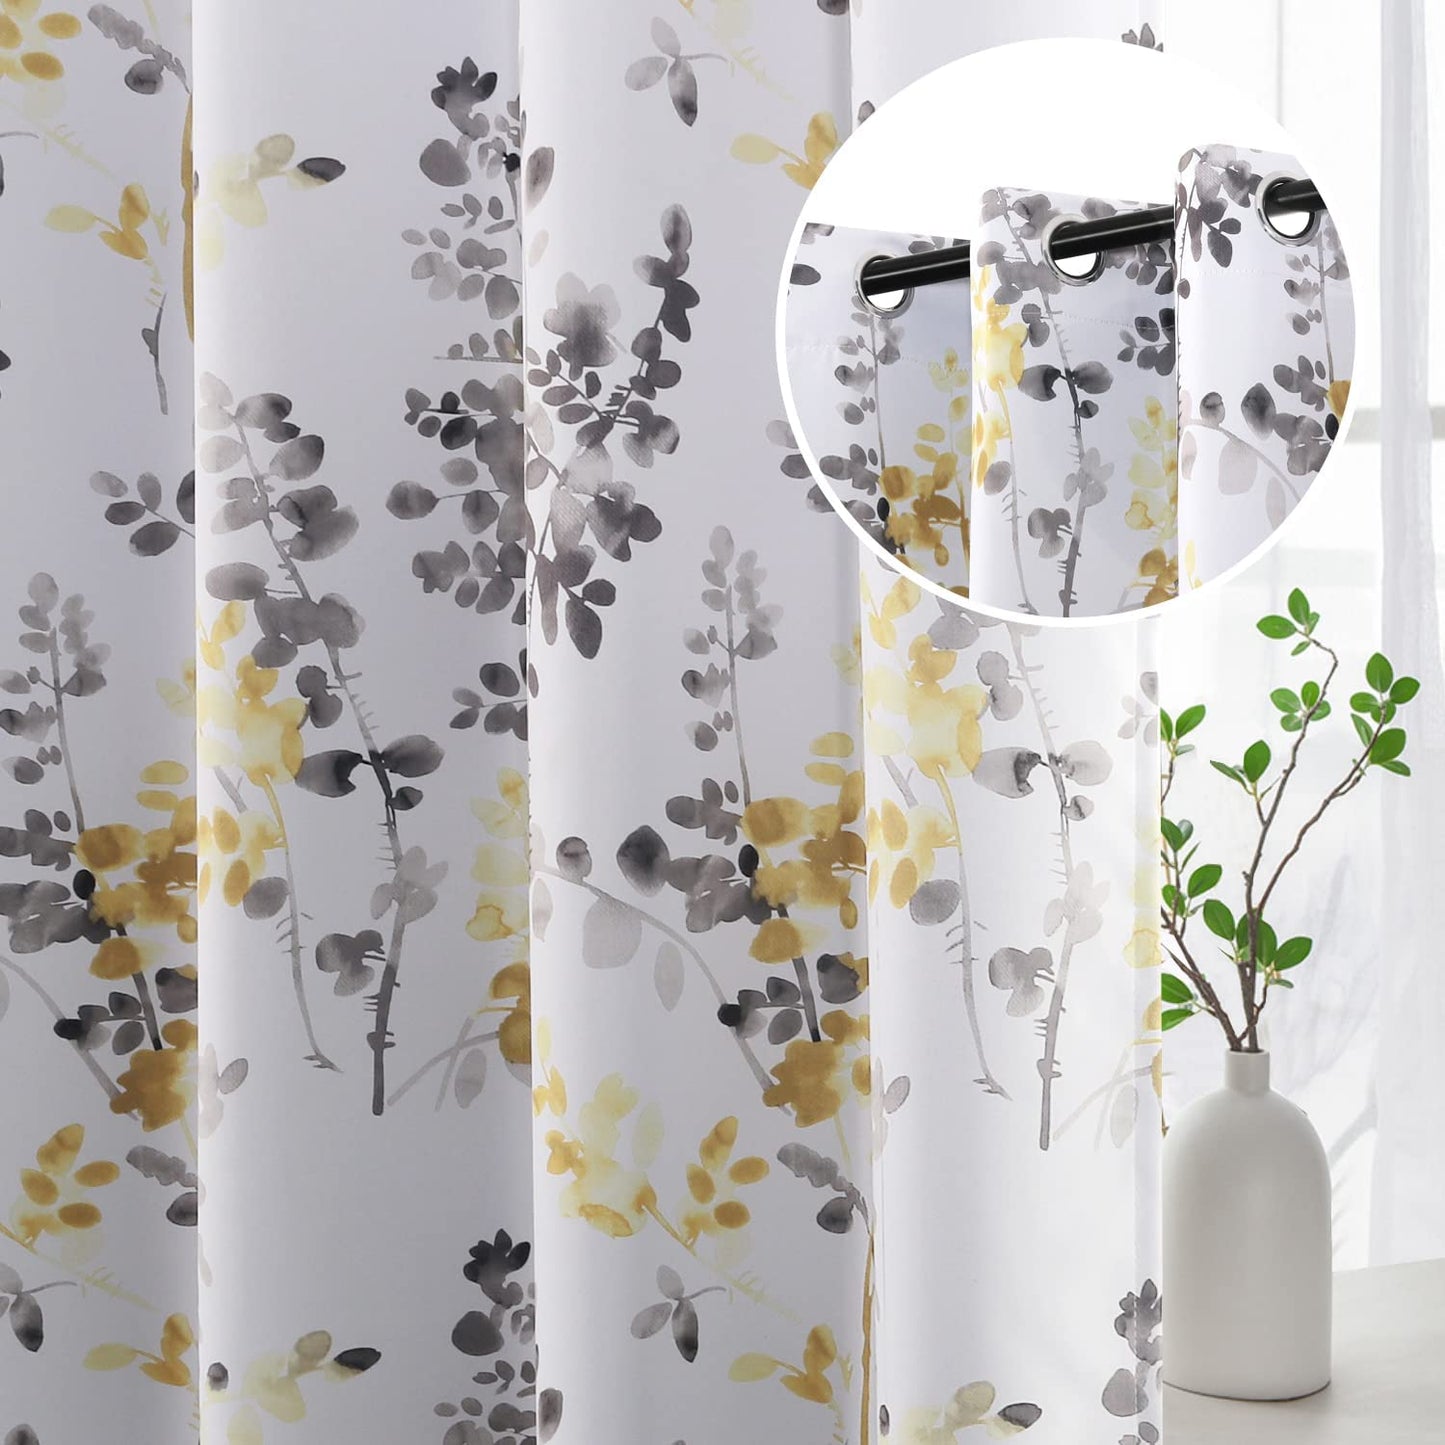 H.VERSAILTEX Blackout Curtains 45 Inch Length 2 Panels Set Room Darkening Thermal Curtains for Bedroom Sound Proof Grommet Floral Curtains, Bluestone and Taupe Vintage Classical Floral Printing  H.VERSAILTEX Grey/Yellow 52"W X 84"L 